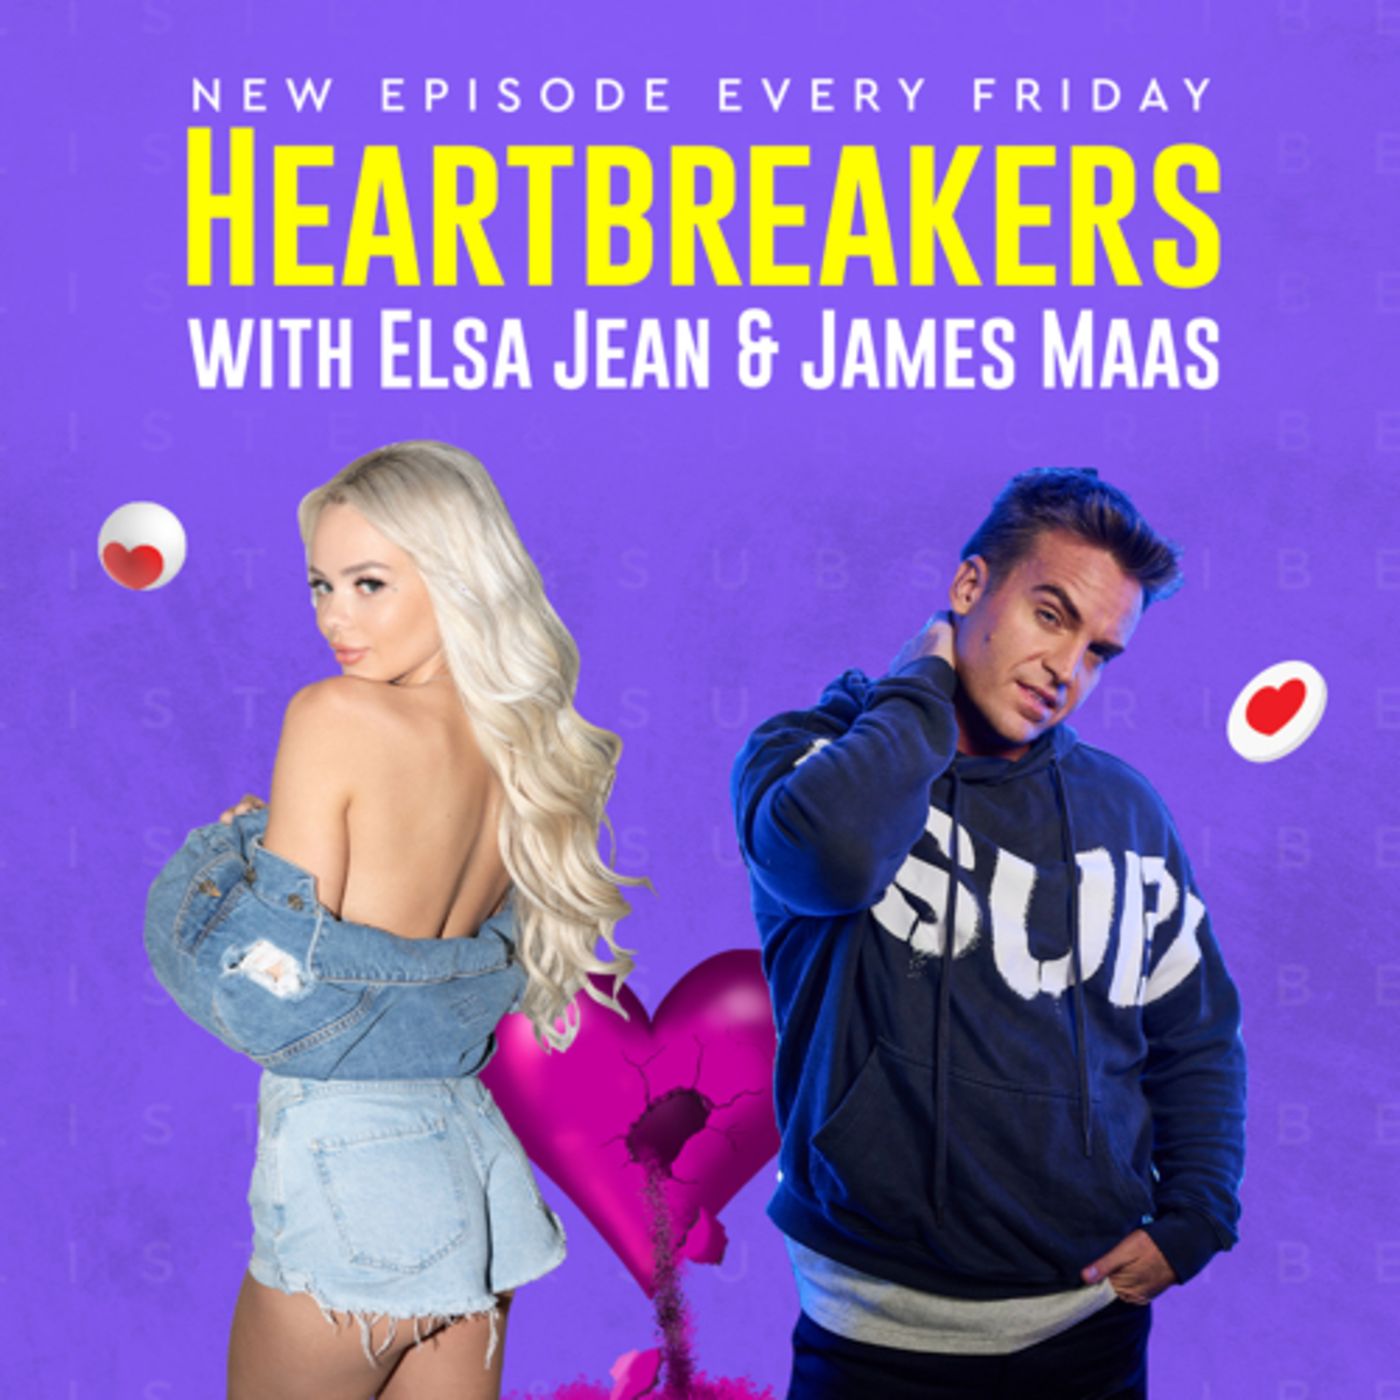 Heartbreakers with Elsa Jean and James Maas Episode 2 !!